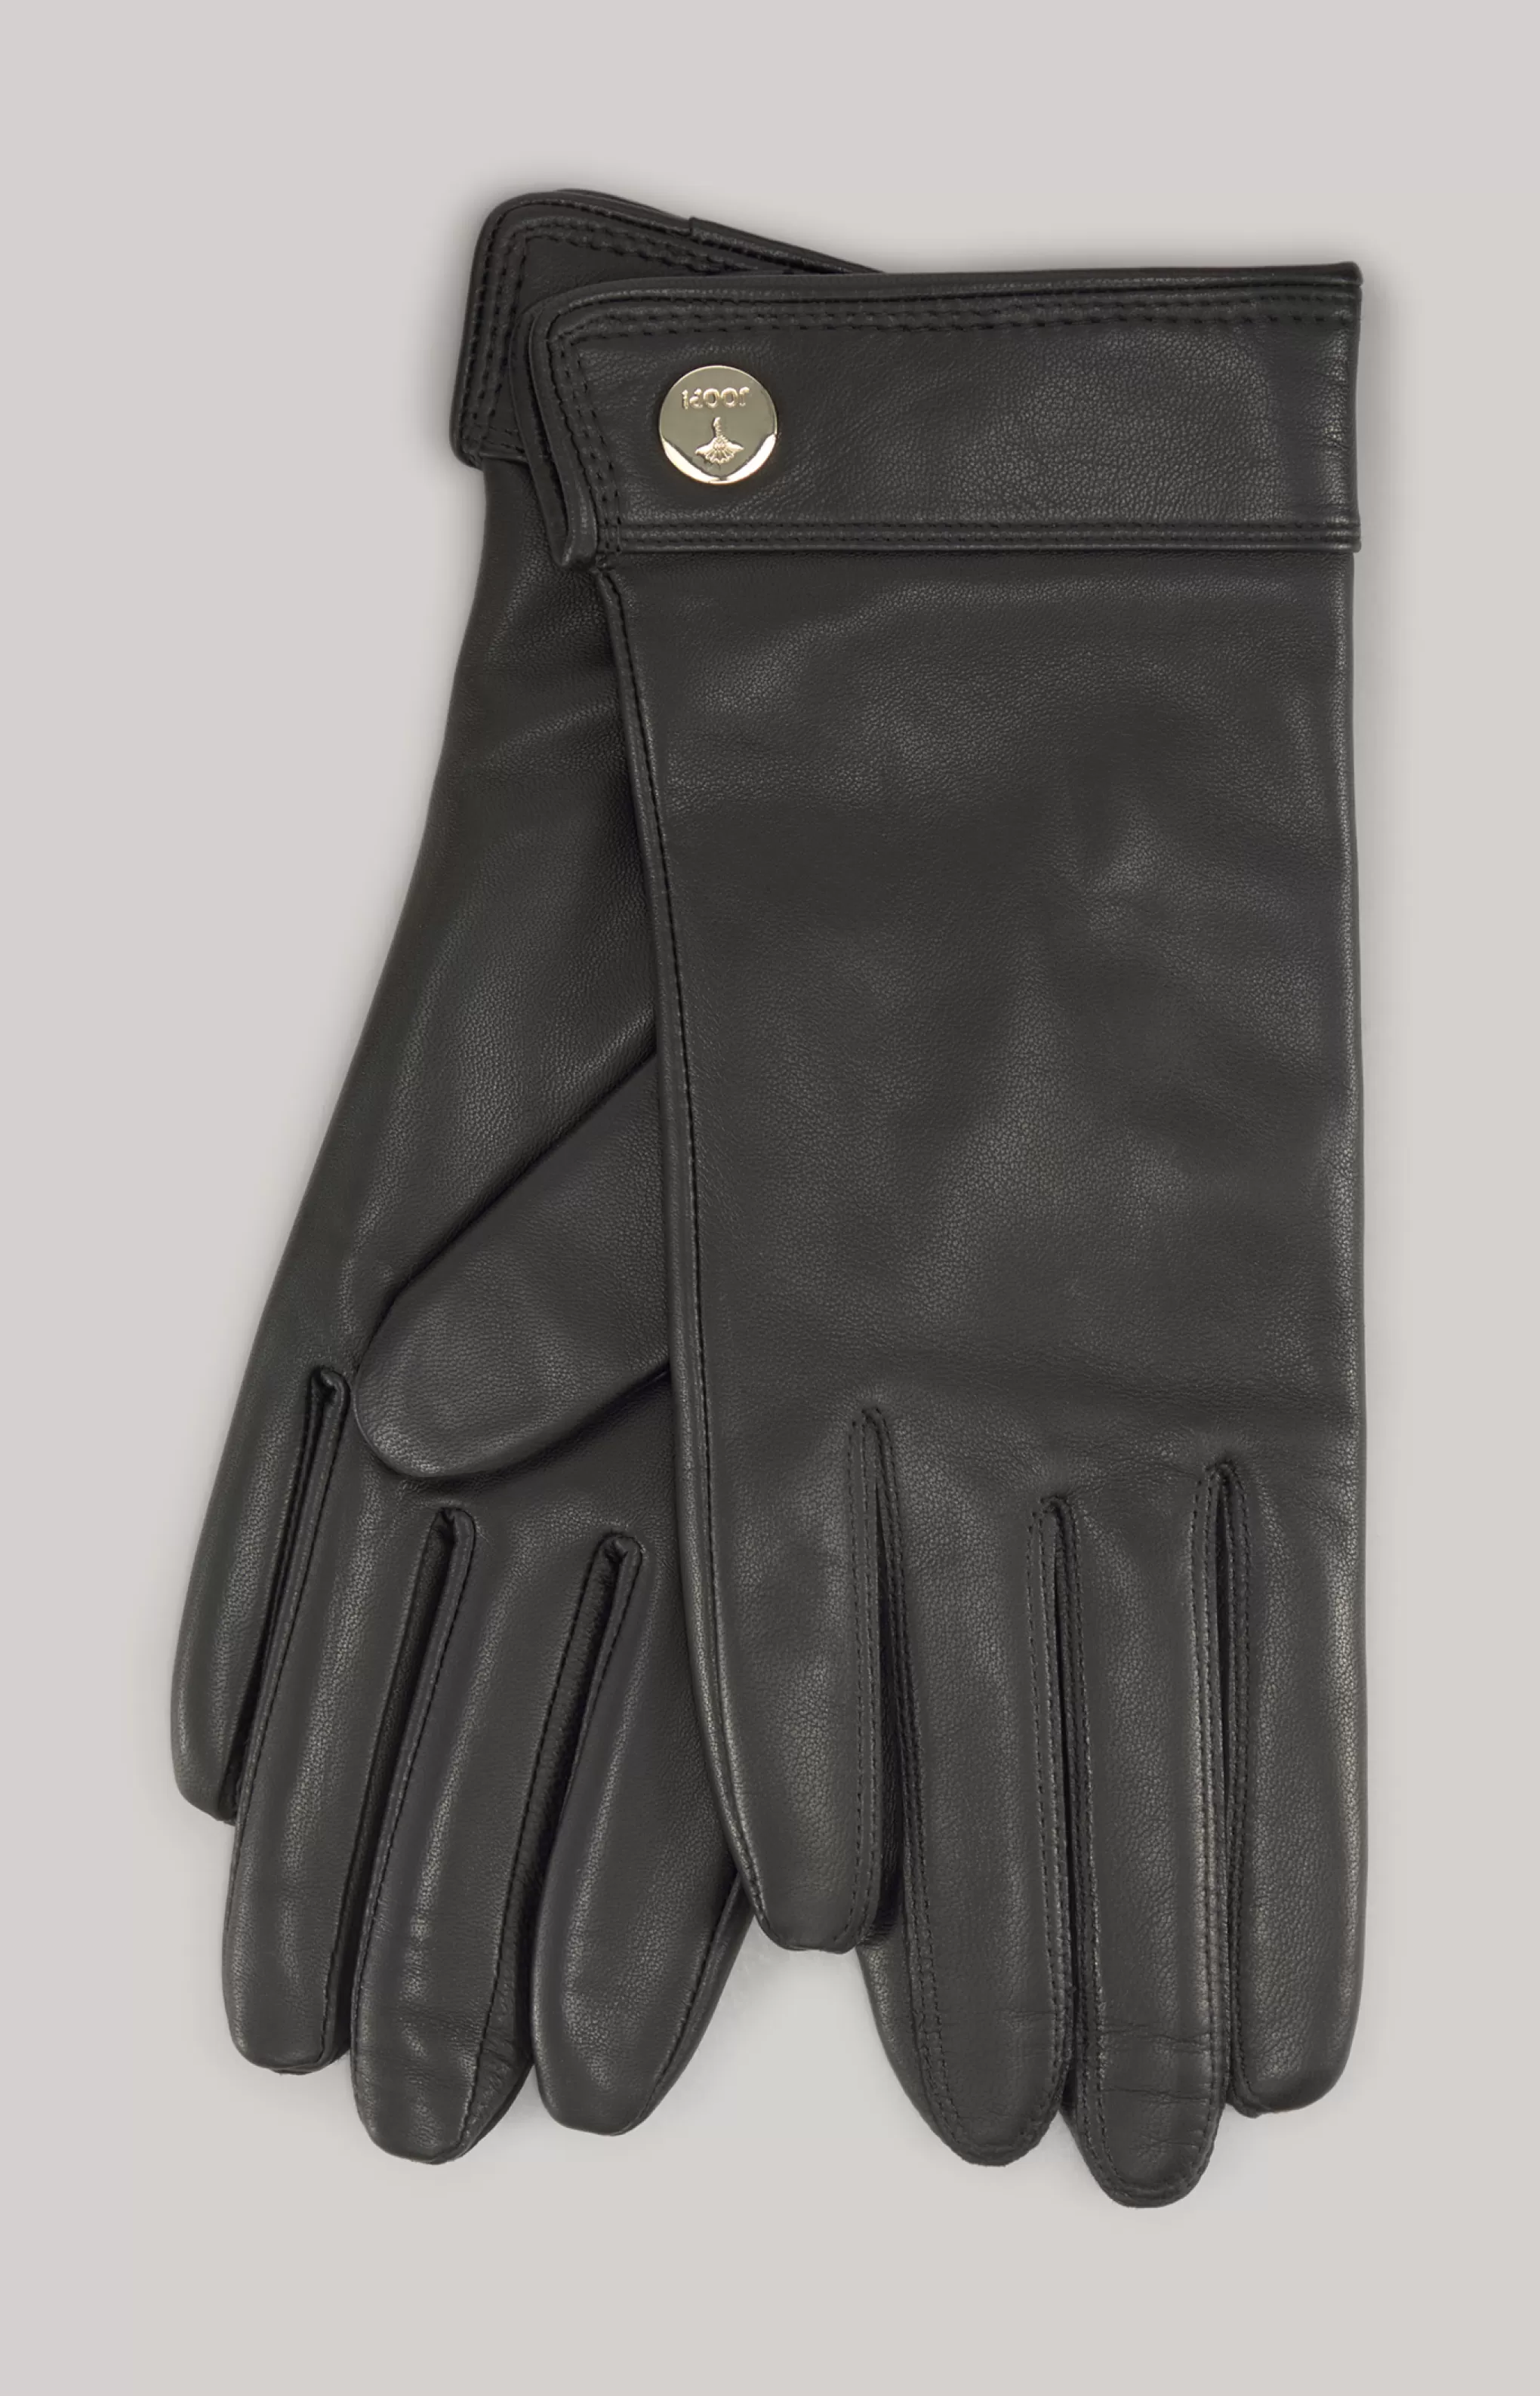 Gloves*JOOP Gloves Lamb Nappa Leather Gloves in